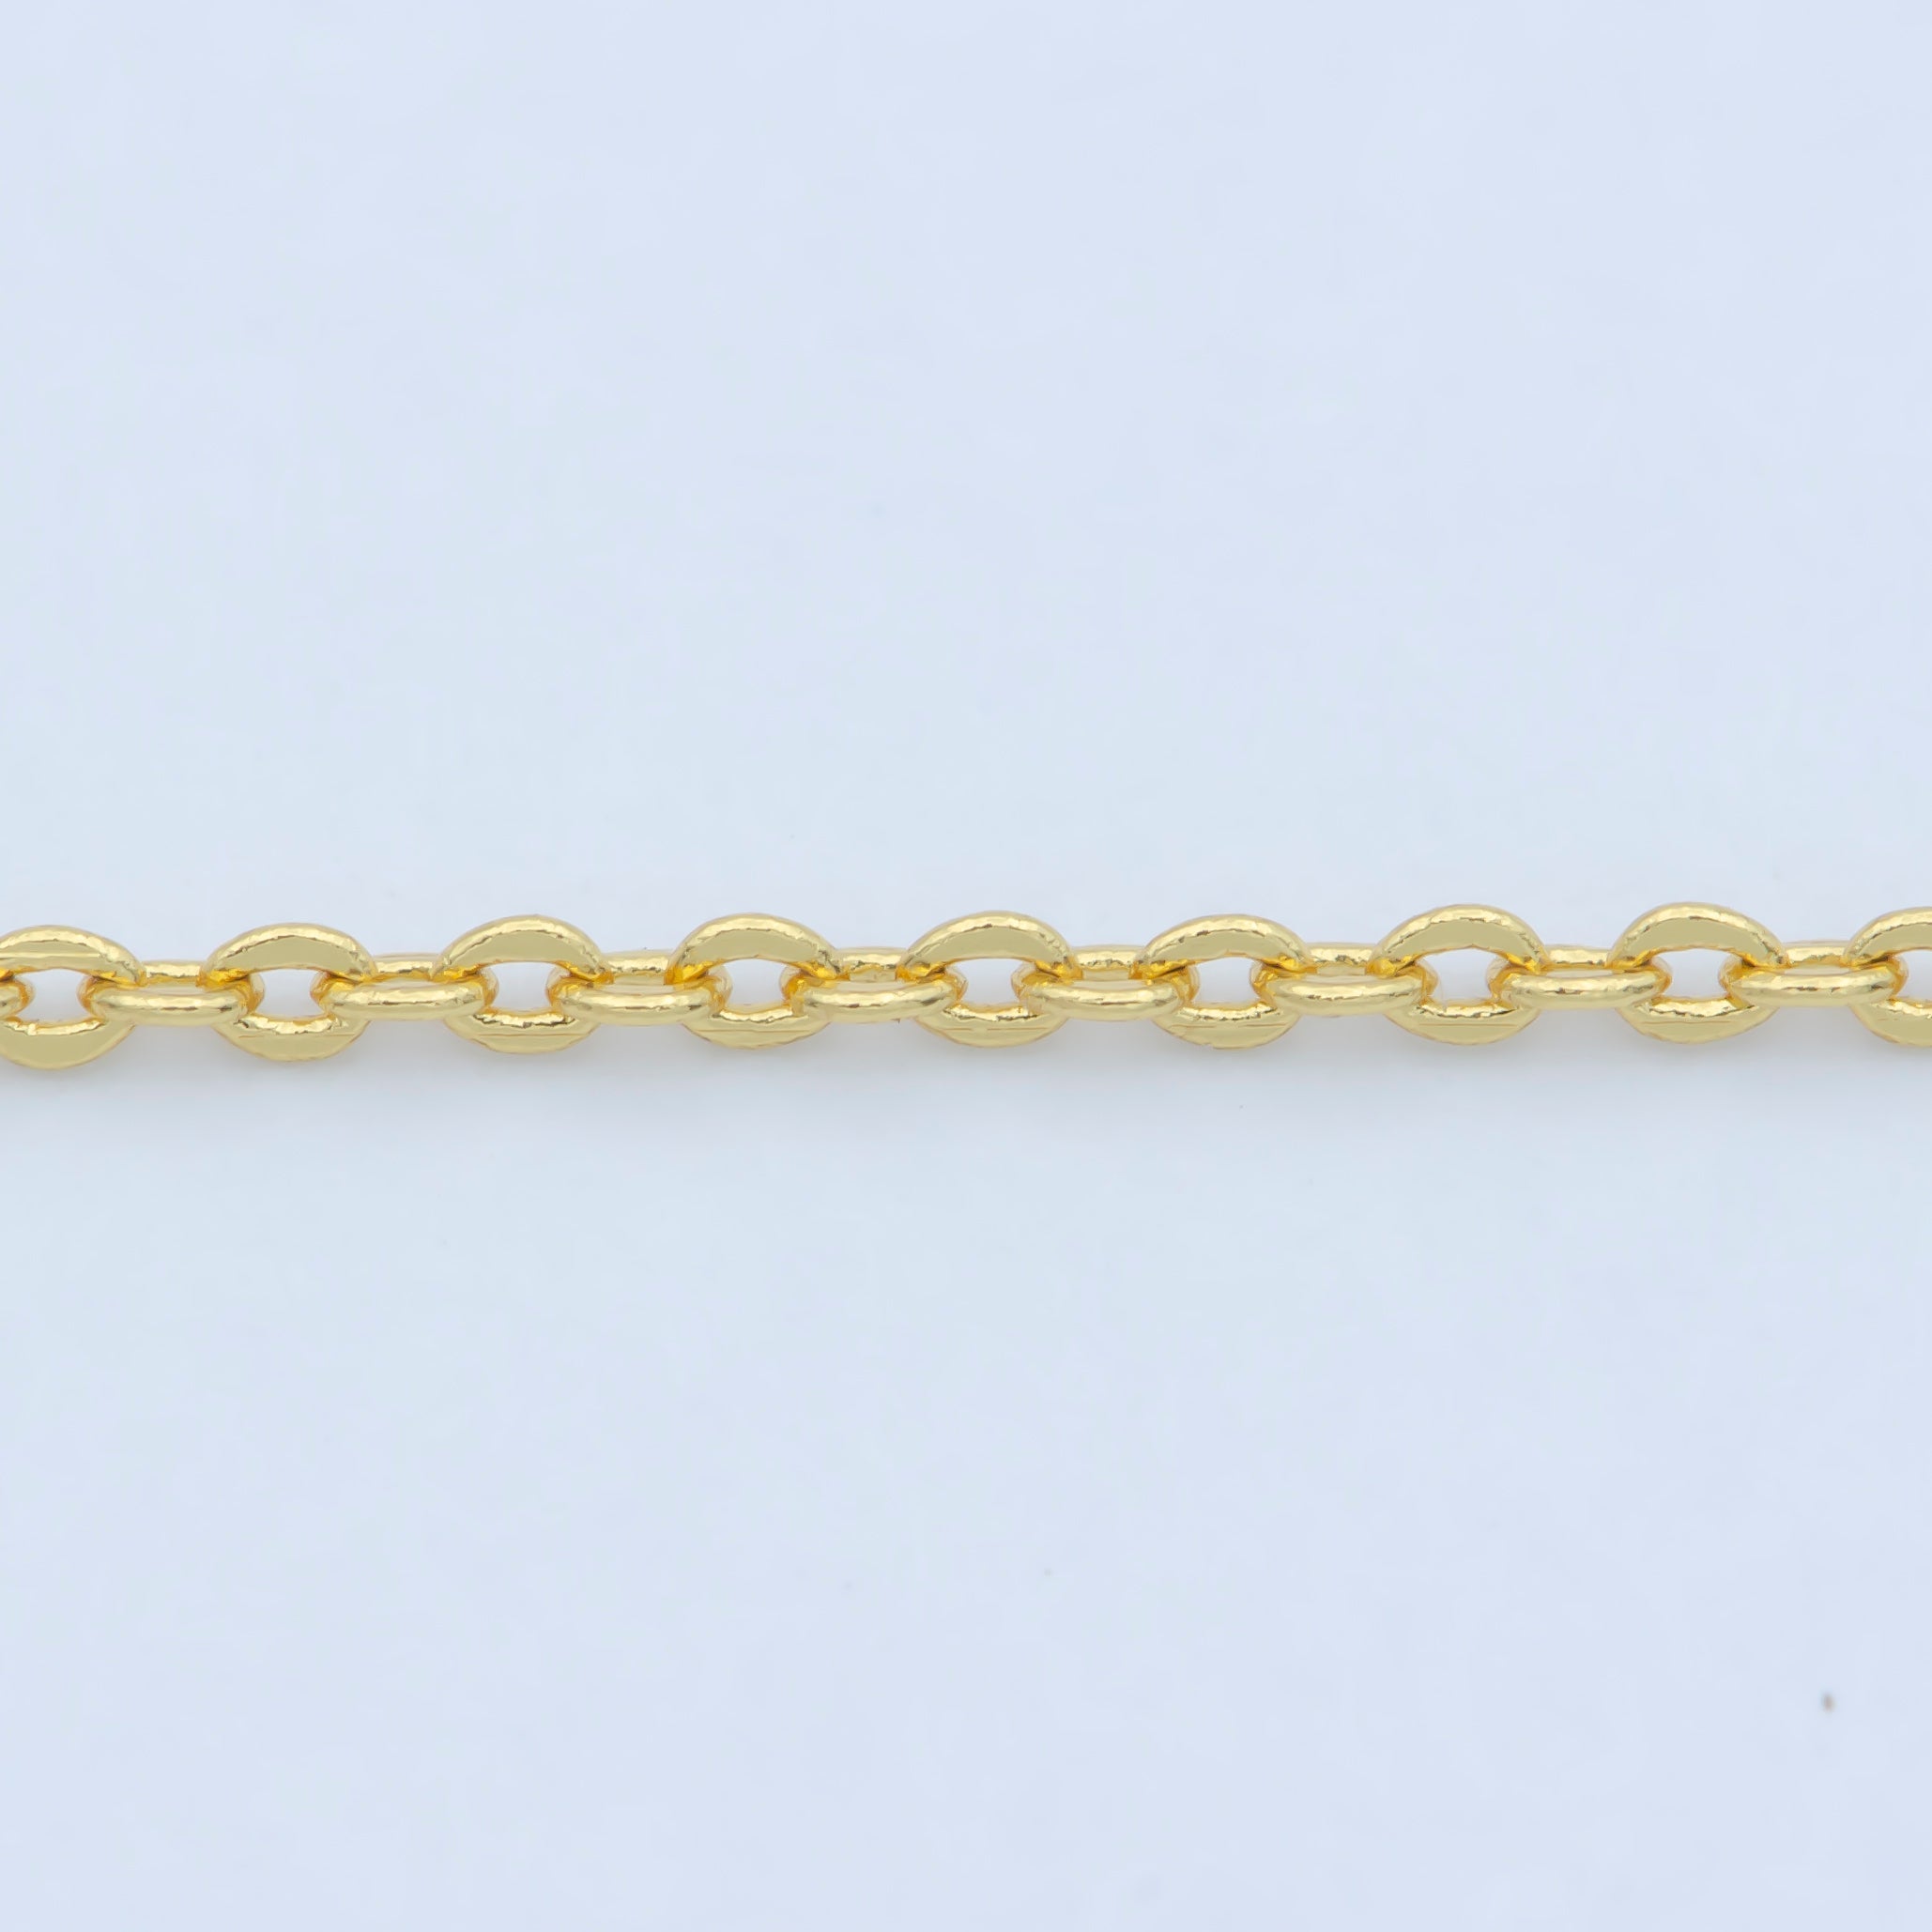 24K Gold Filled 0.7mm Dainty Cable Chain 18 Inch Necklace w. Extender | WA-187 - DLUXCA